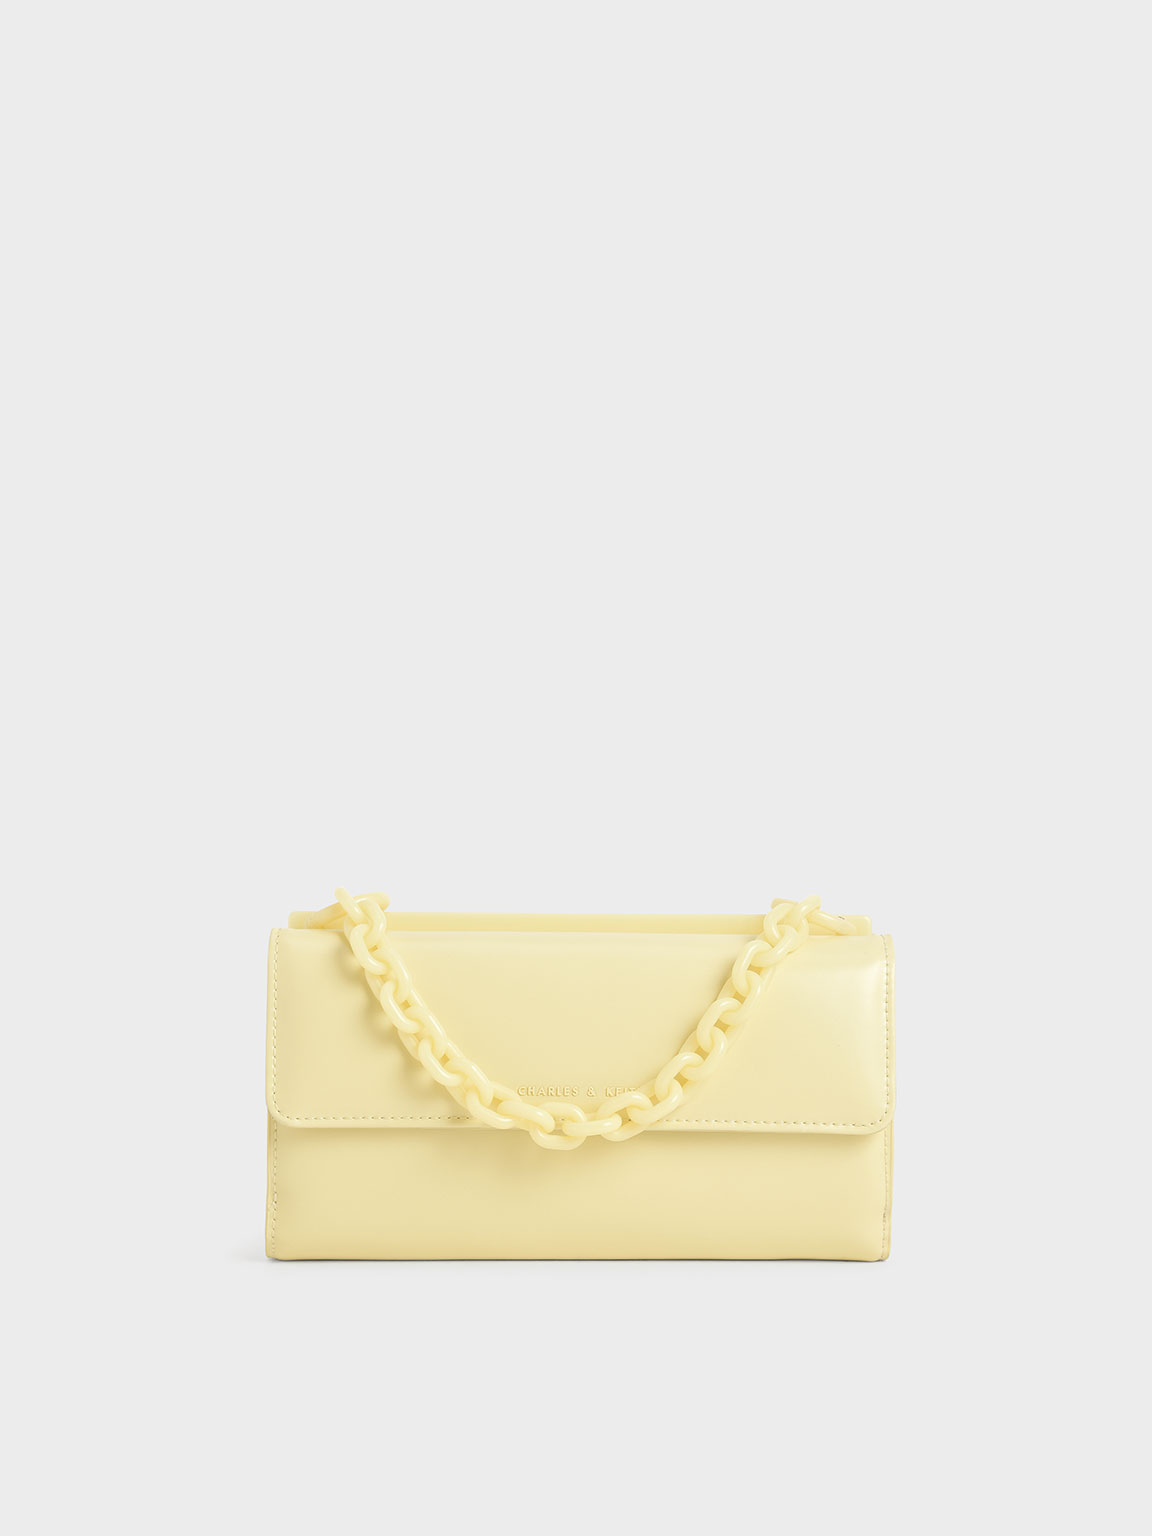   Butter Glow In The Dark  Wallet CHARLES  